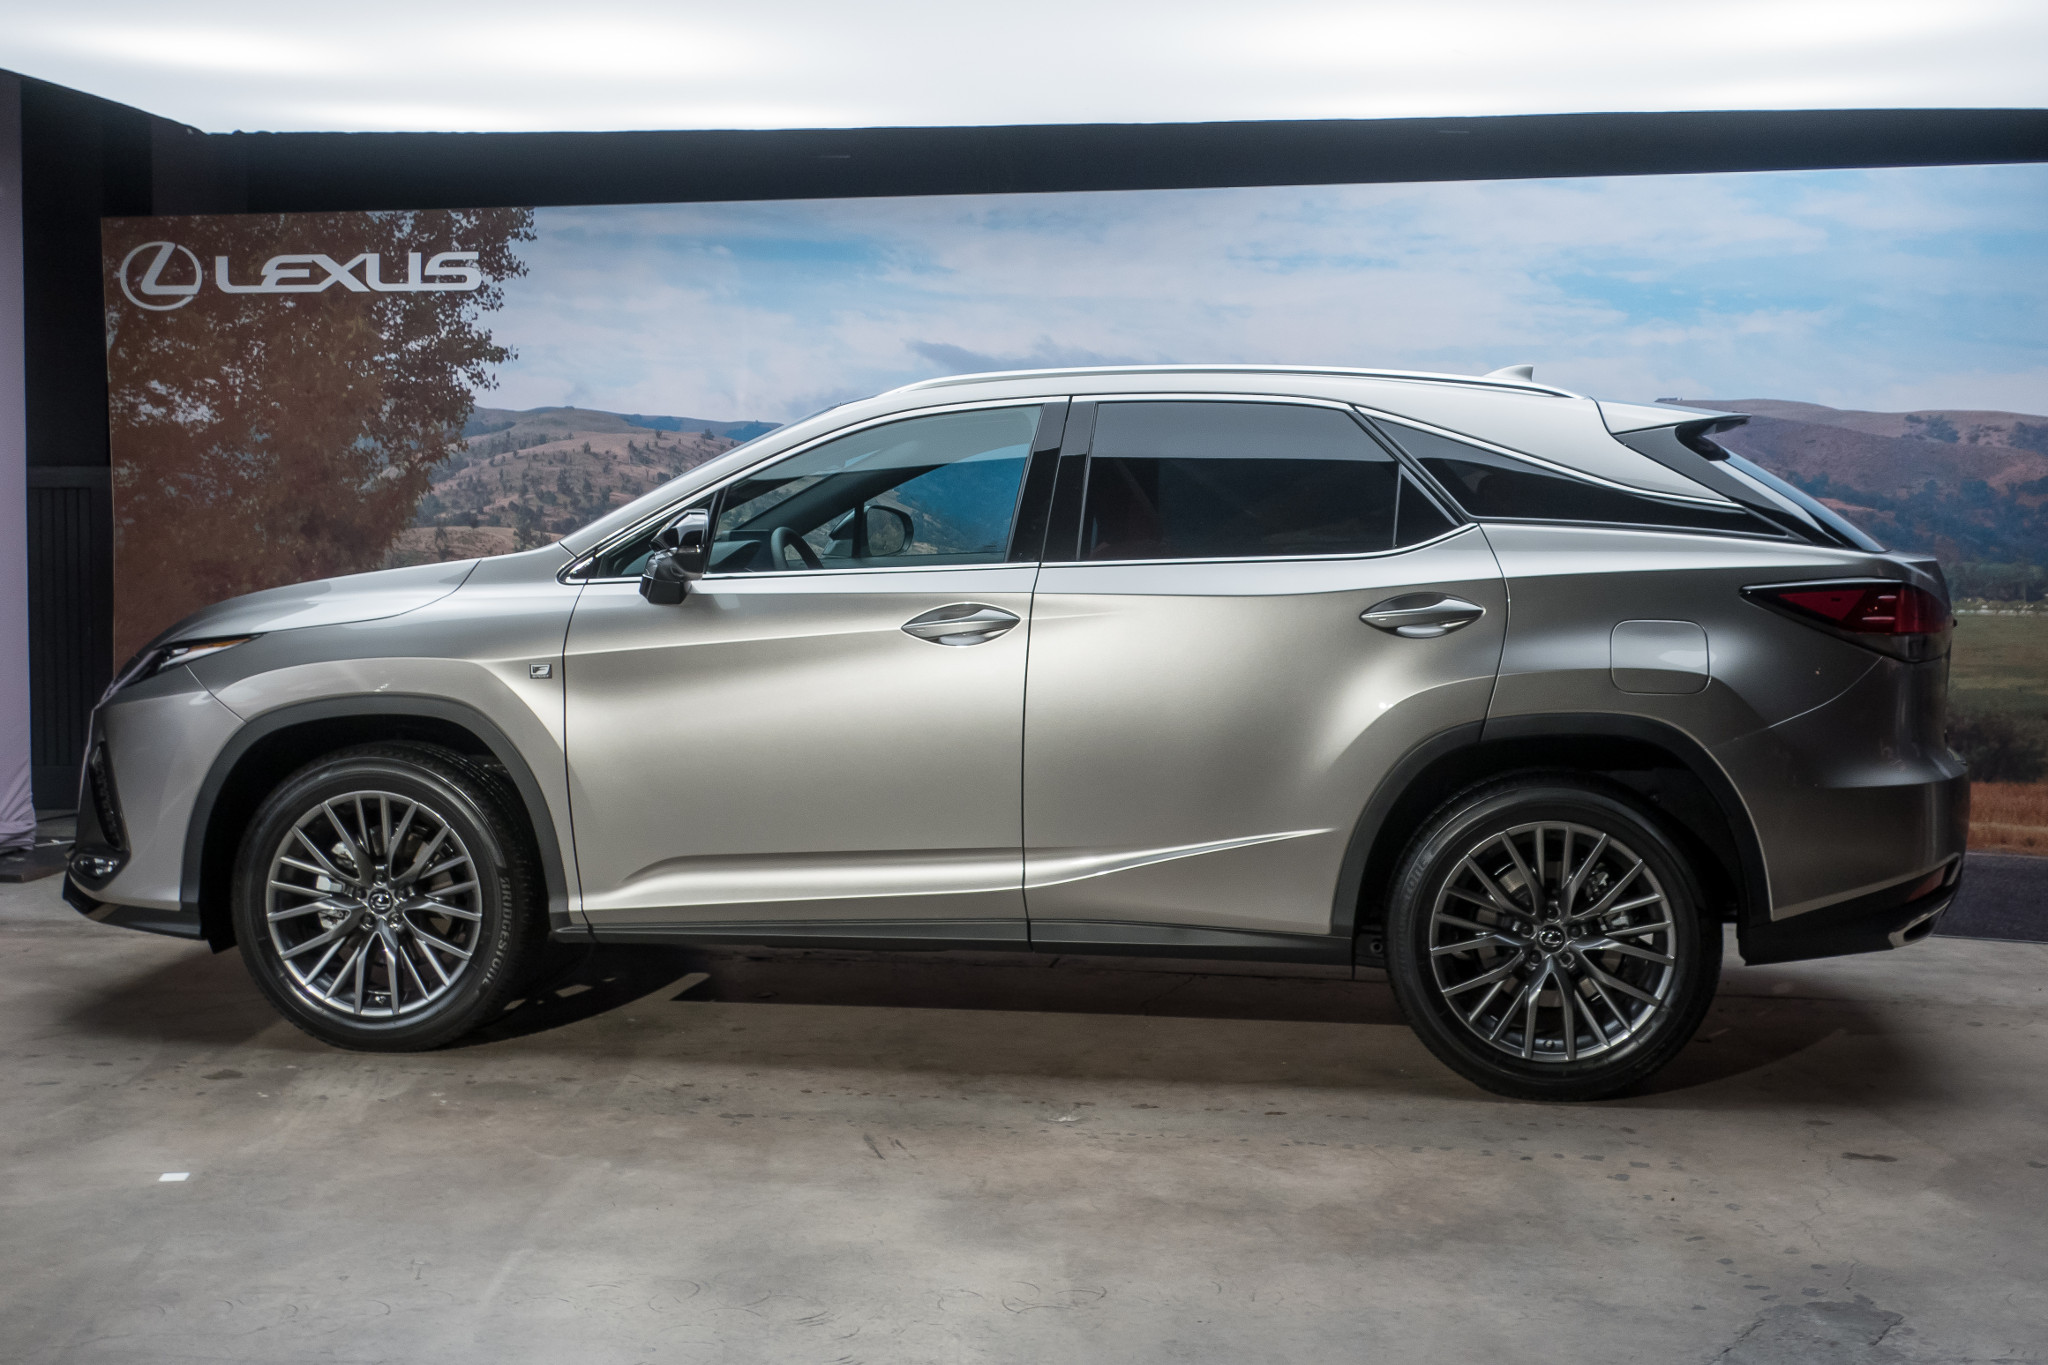 Car Wars Which Looks Better 2020 Lexus Rx Or New 2021 Toyota